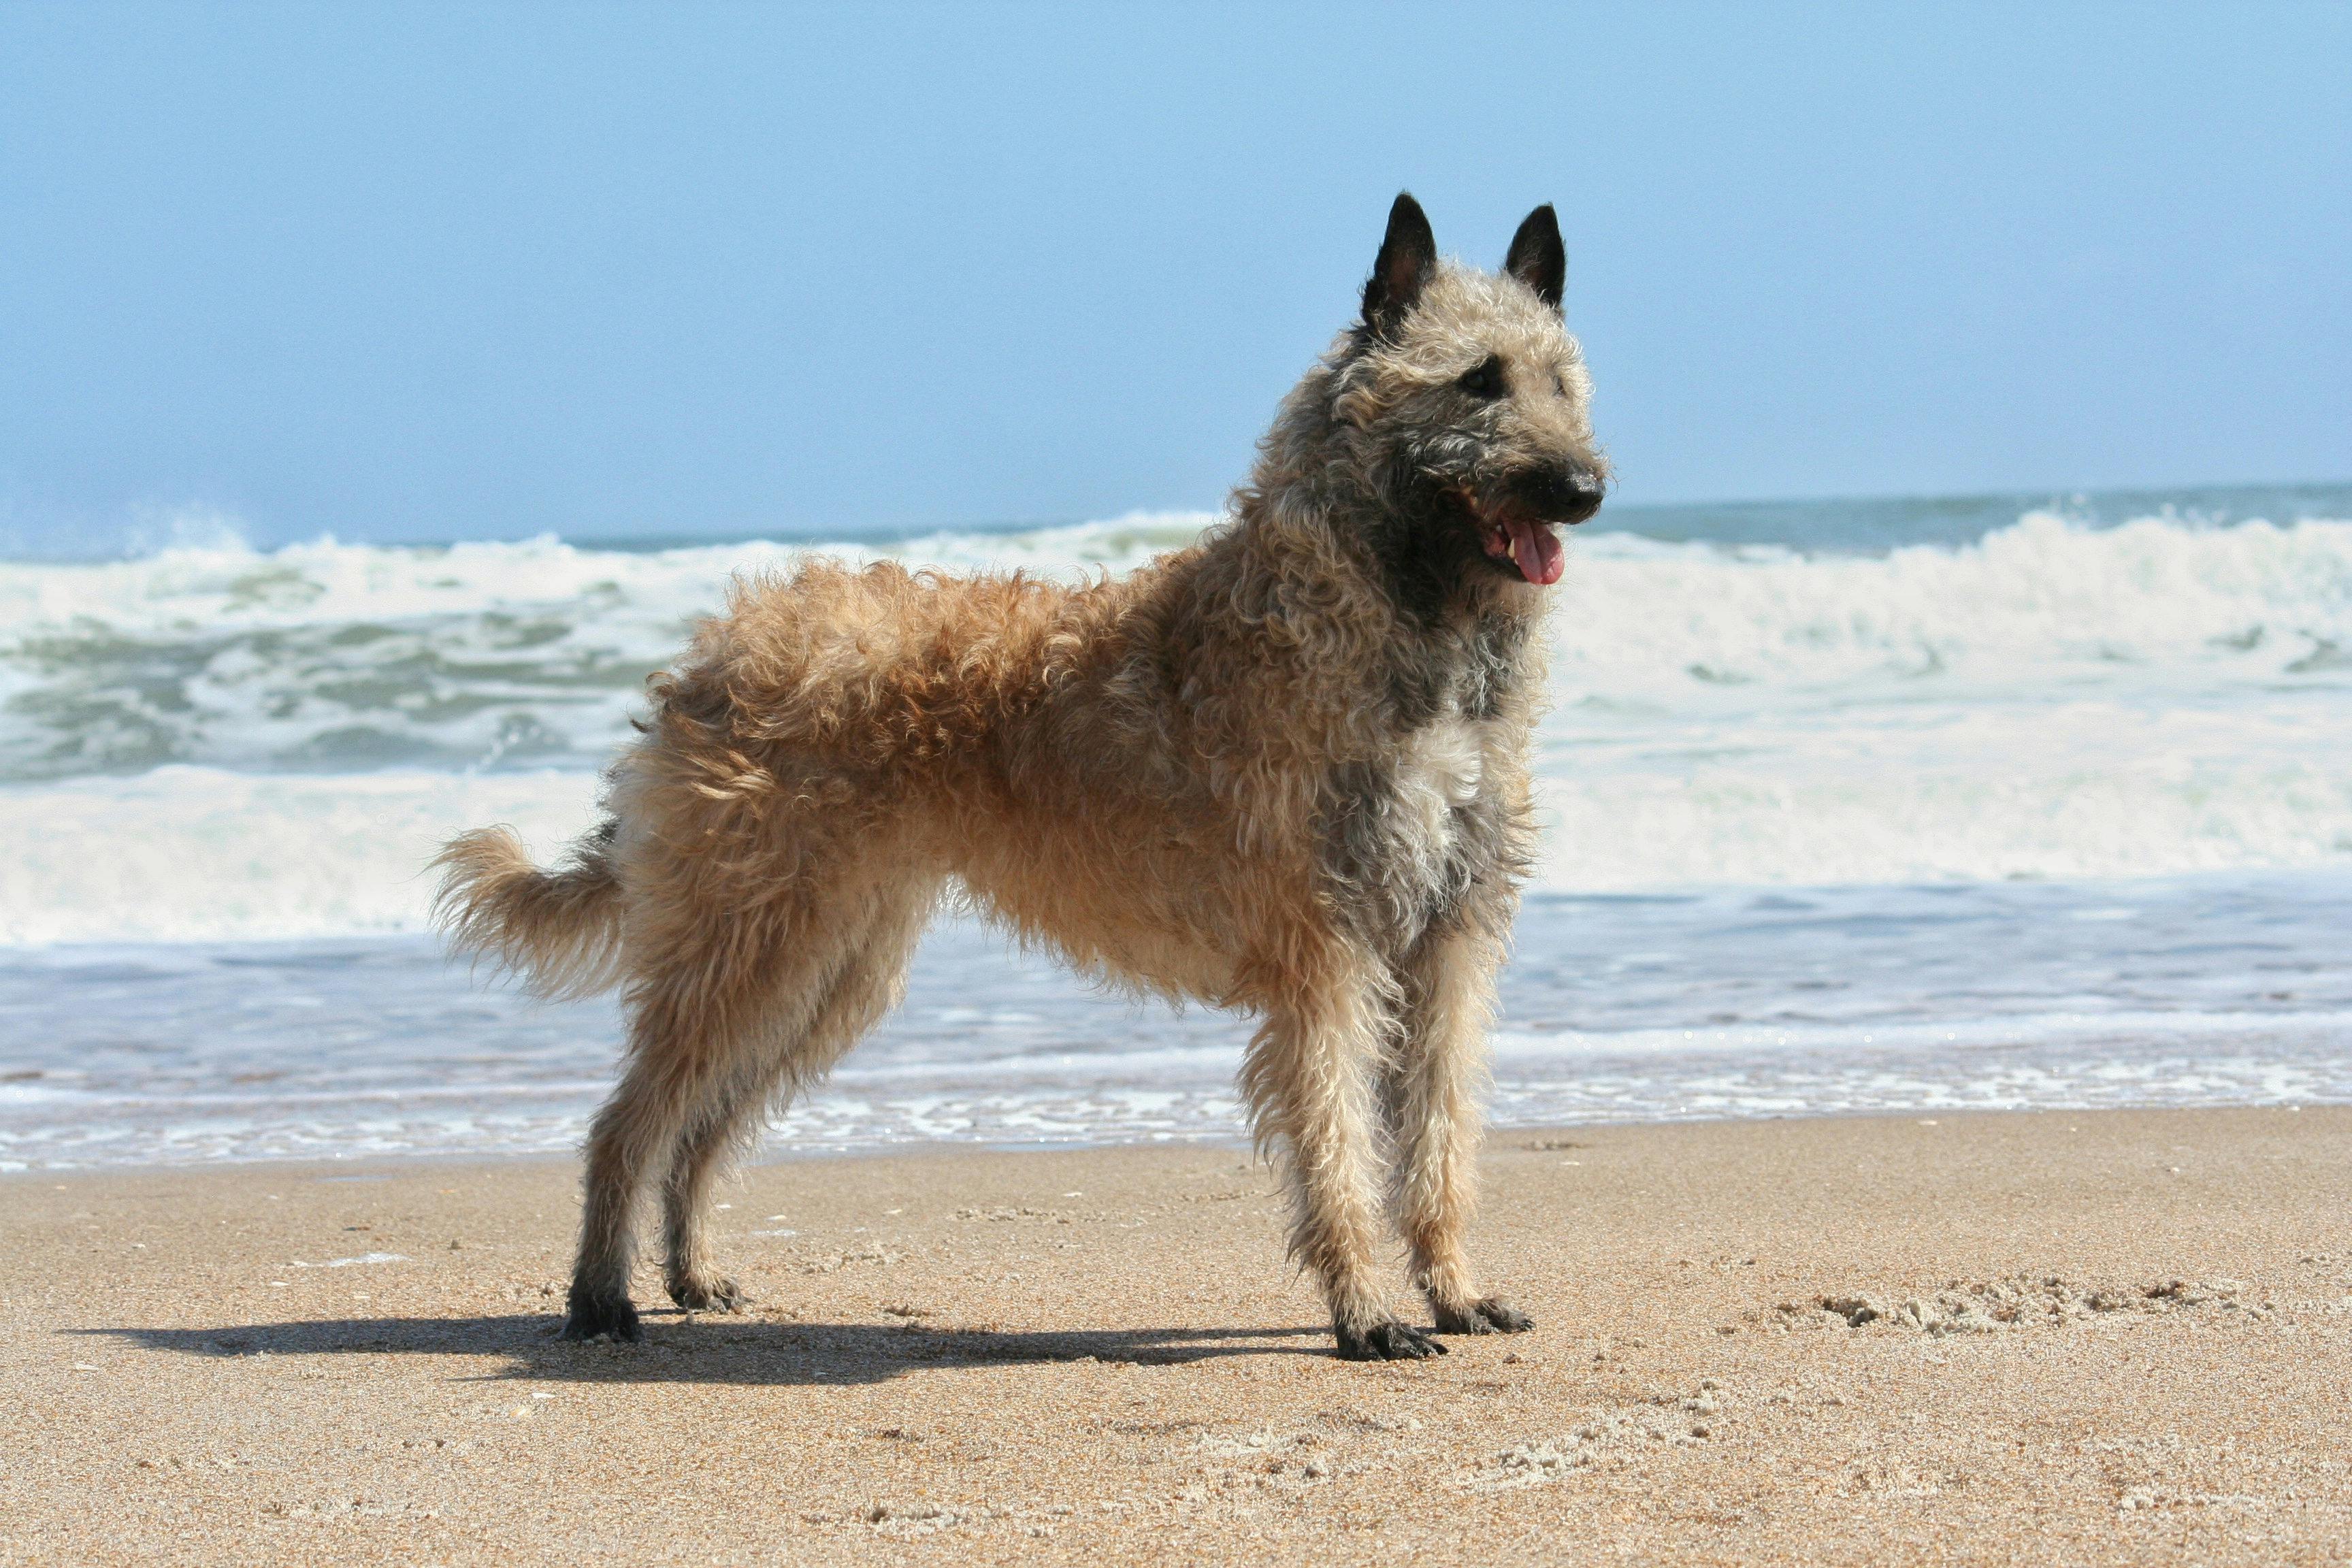 Belgian Laekenois standing on a sandy beach with the waves crashing behind